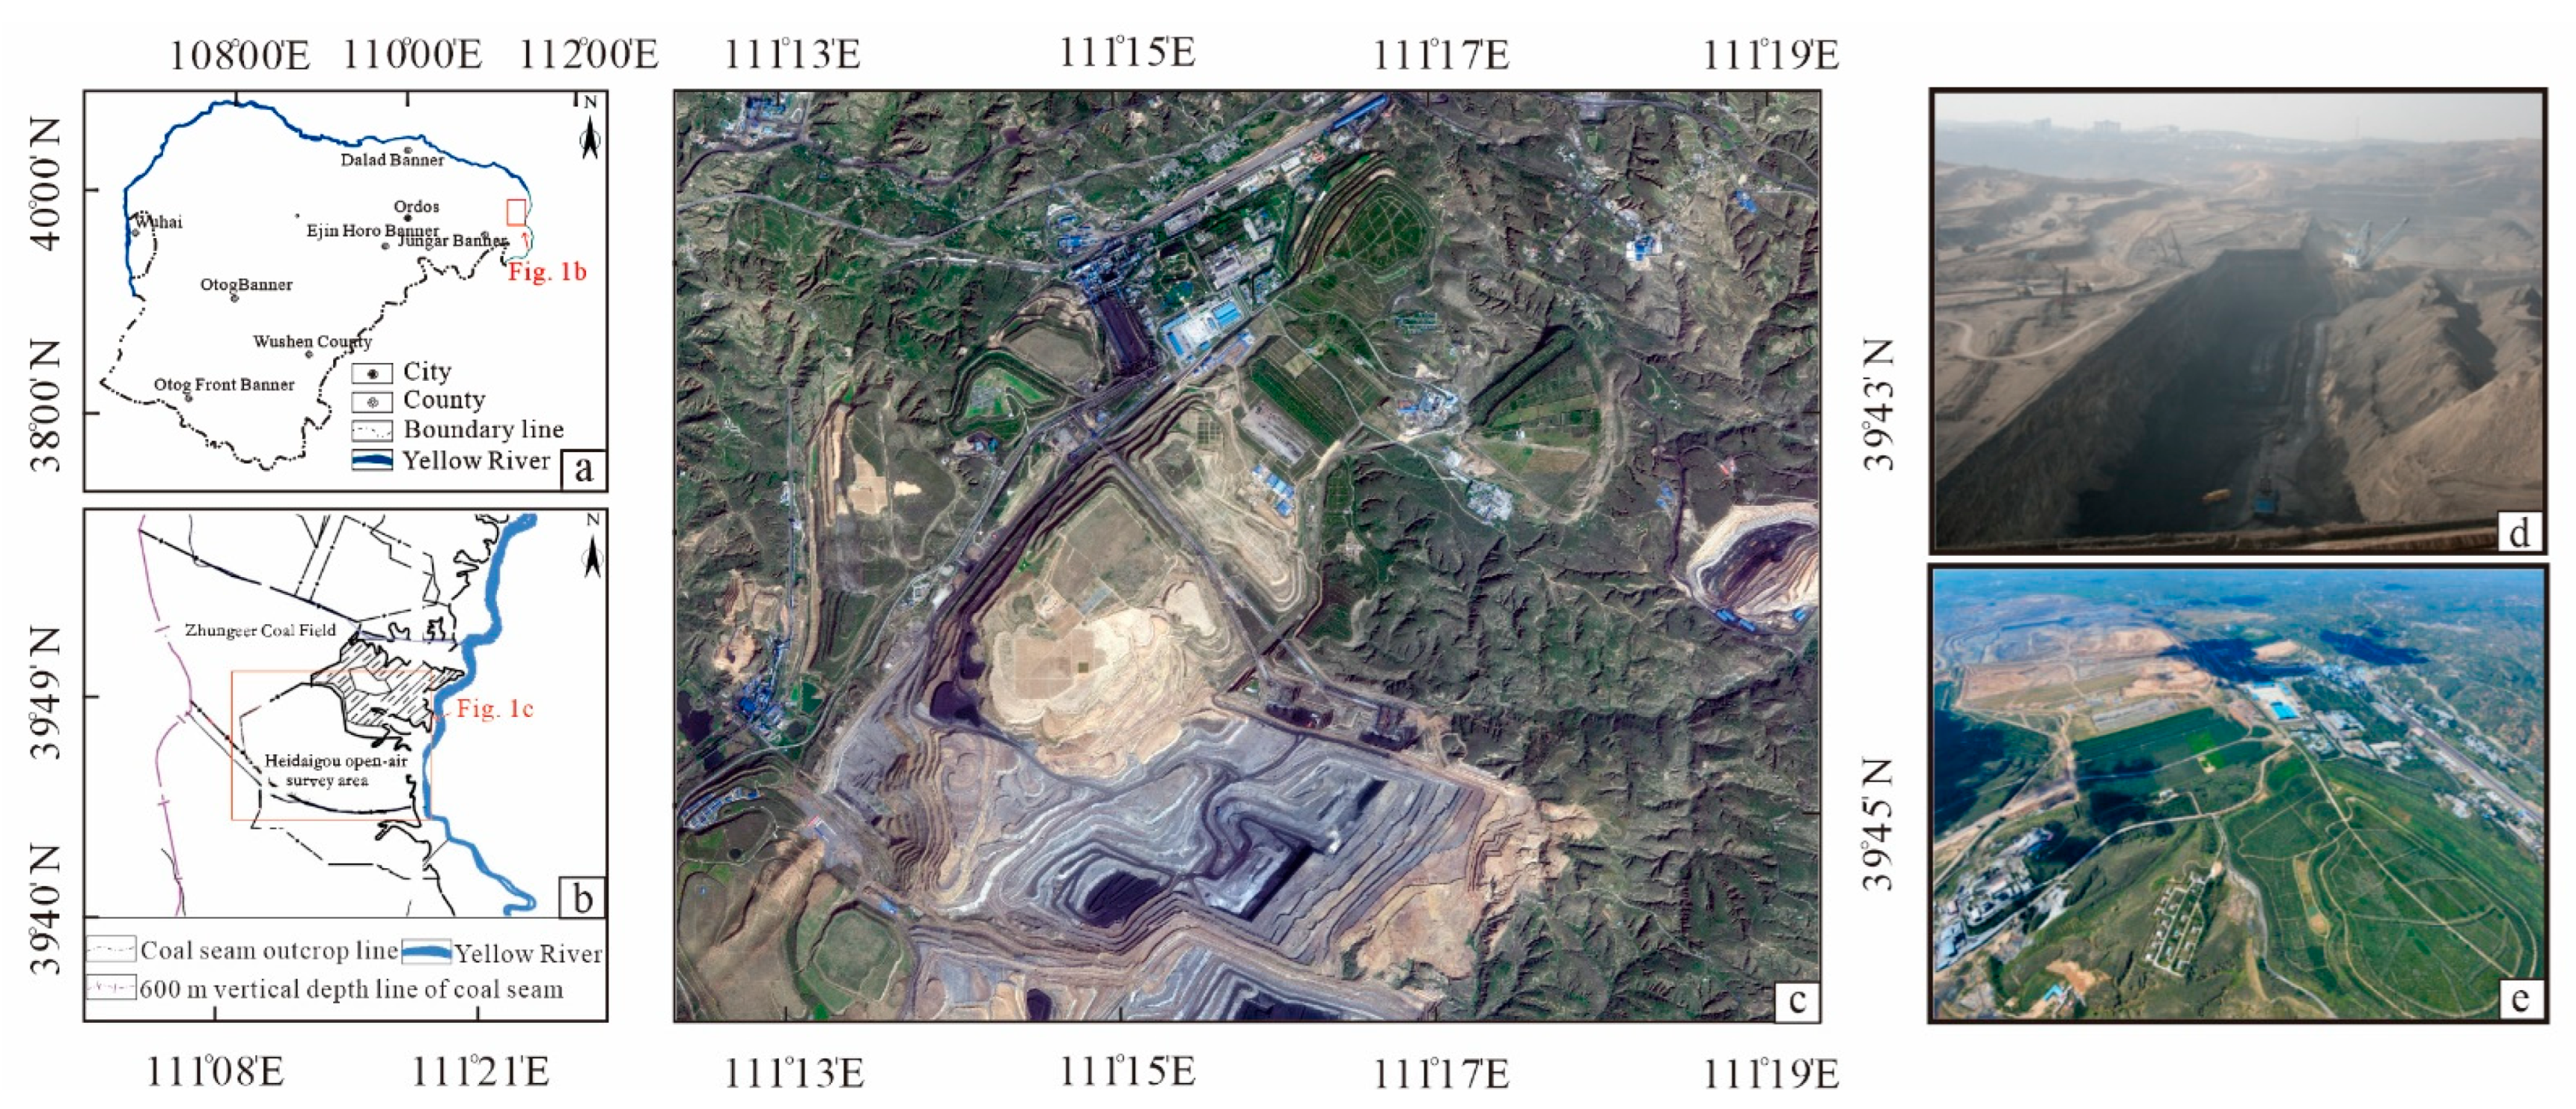 IJERPH | Free Full-Text | The Evolution of Landscape Patterns and Its  Ecological Effects of Open-Pit Mining: A Case Study in the Heidaigou Mining  Area, China